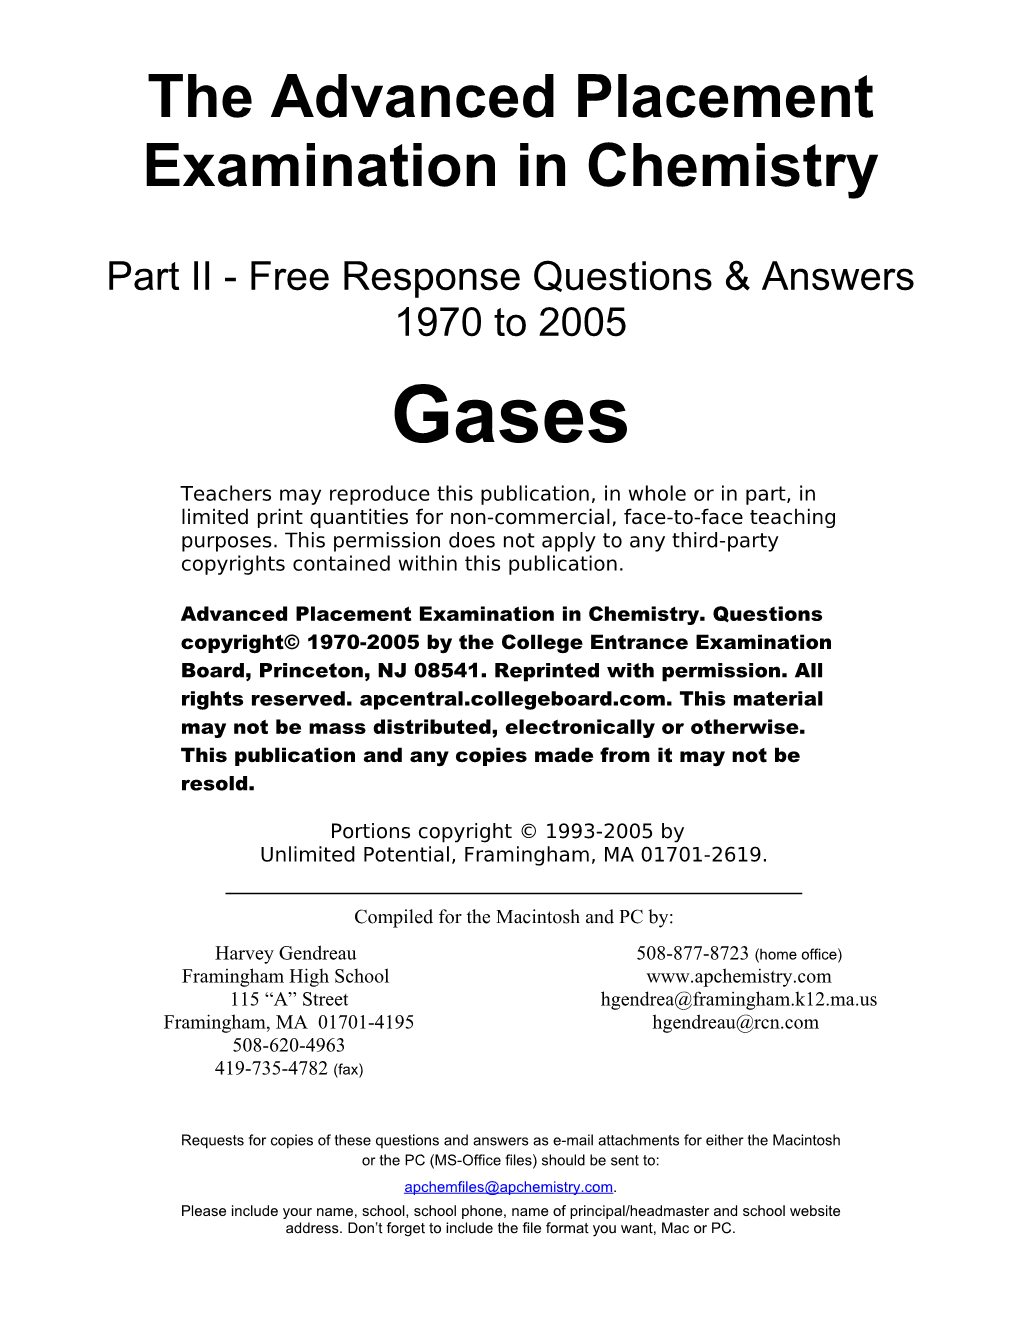 The Advanced Placement Examination in Chemistry